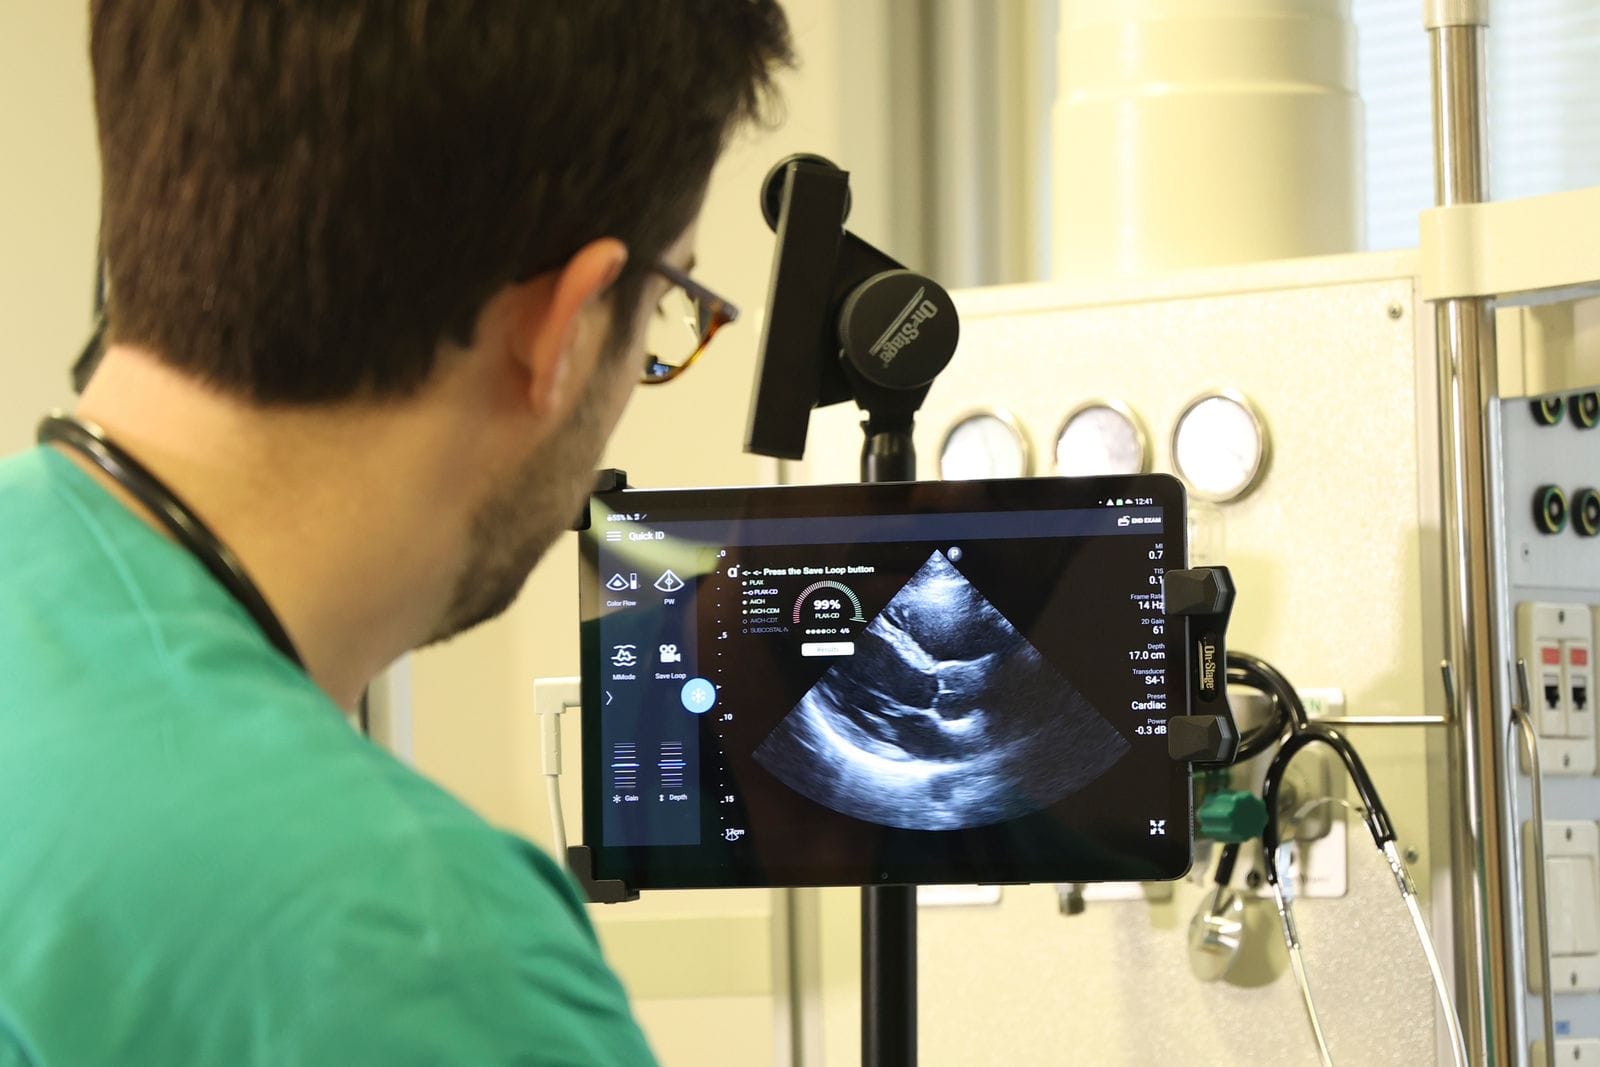 AISAP raised $13M to accelerate its AI-powered ultrasound solution